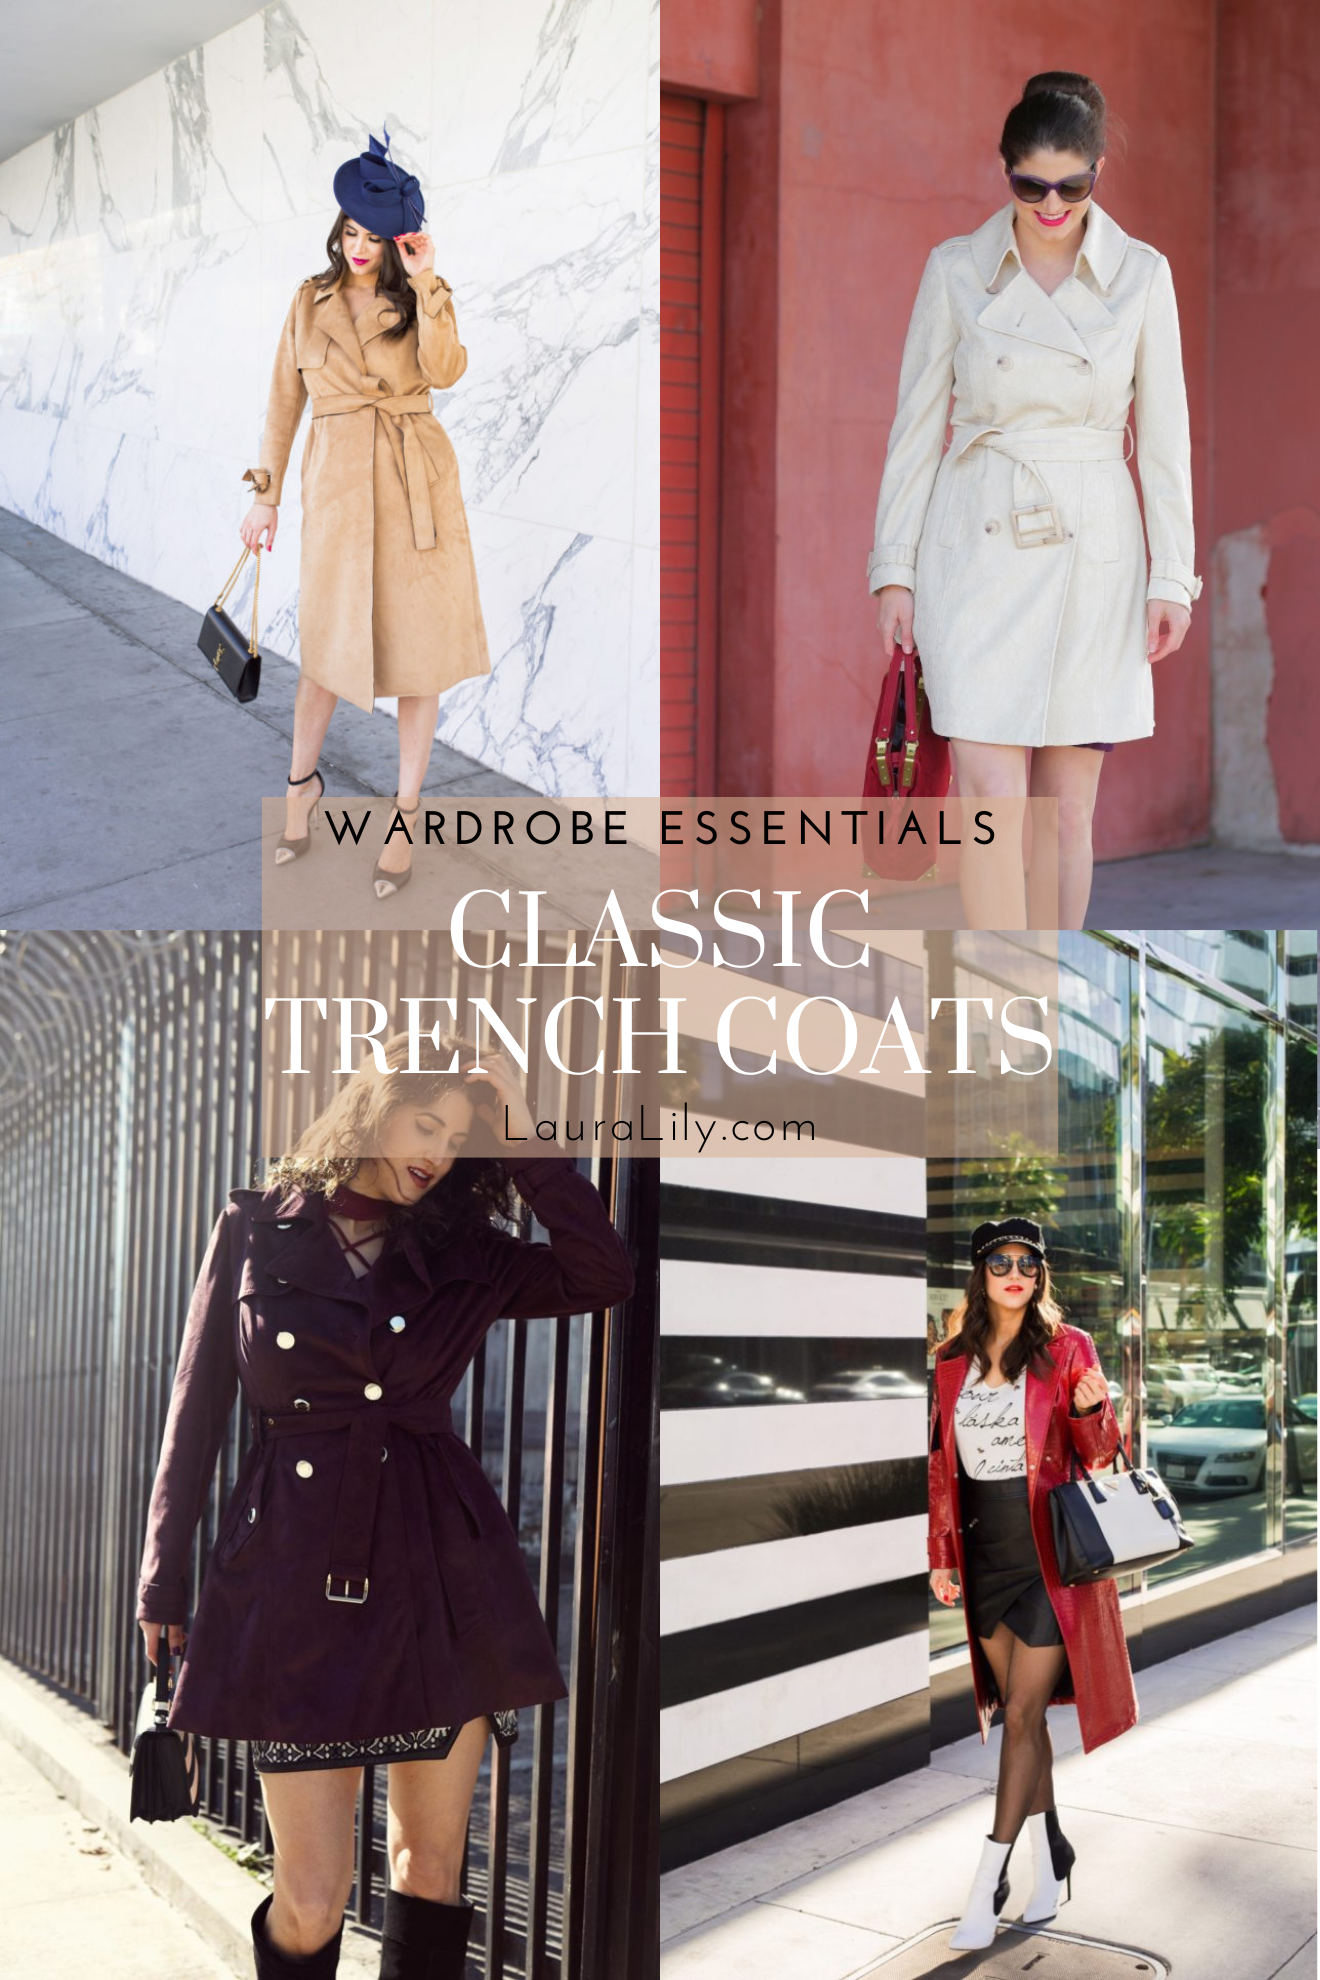 Classic Trench Coats, wardrobe essentials, Fashion Blogger Laura Lily, Spring Style,